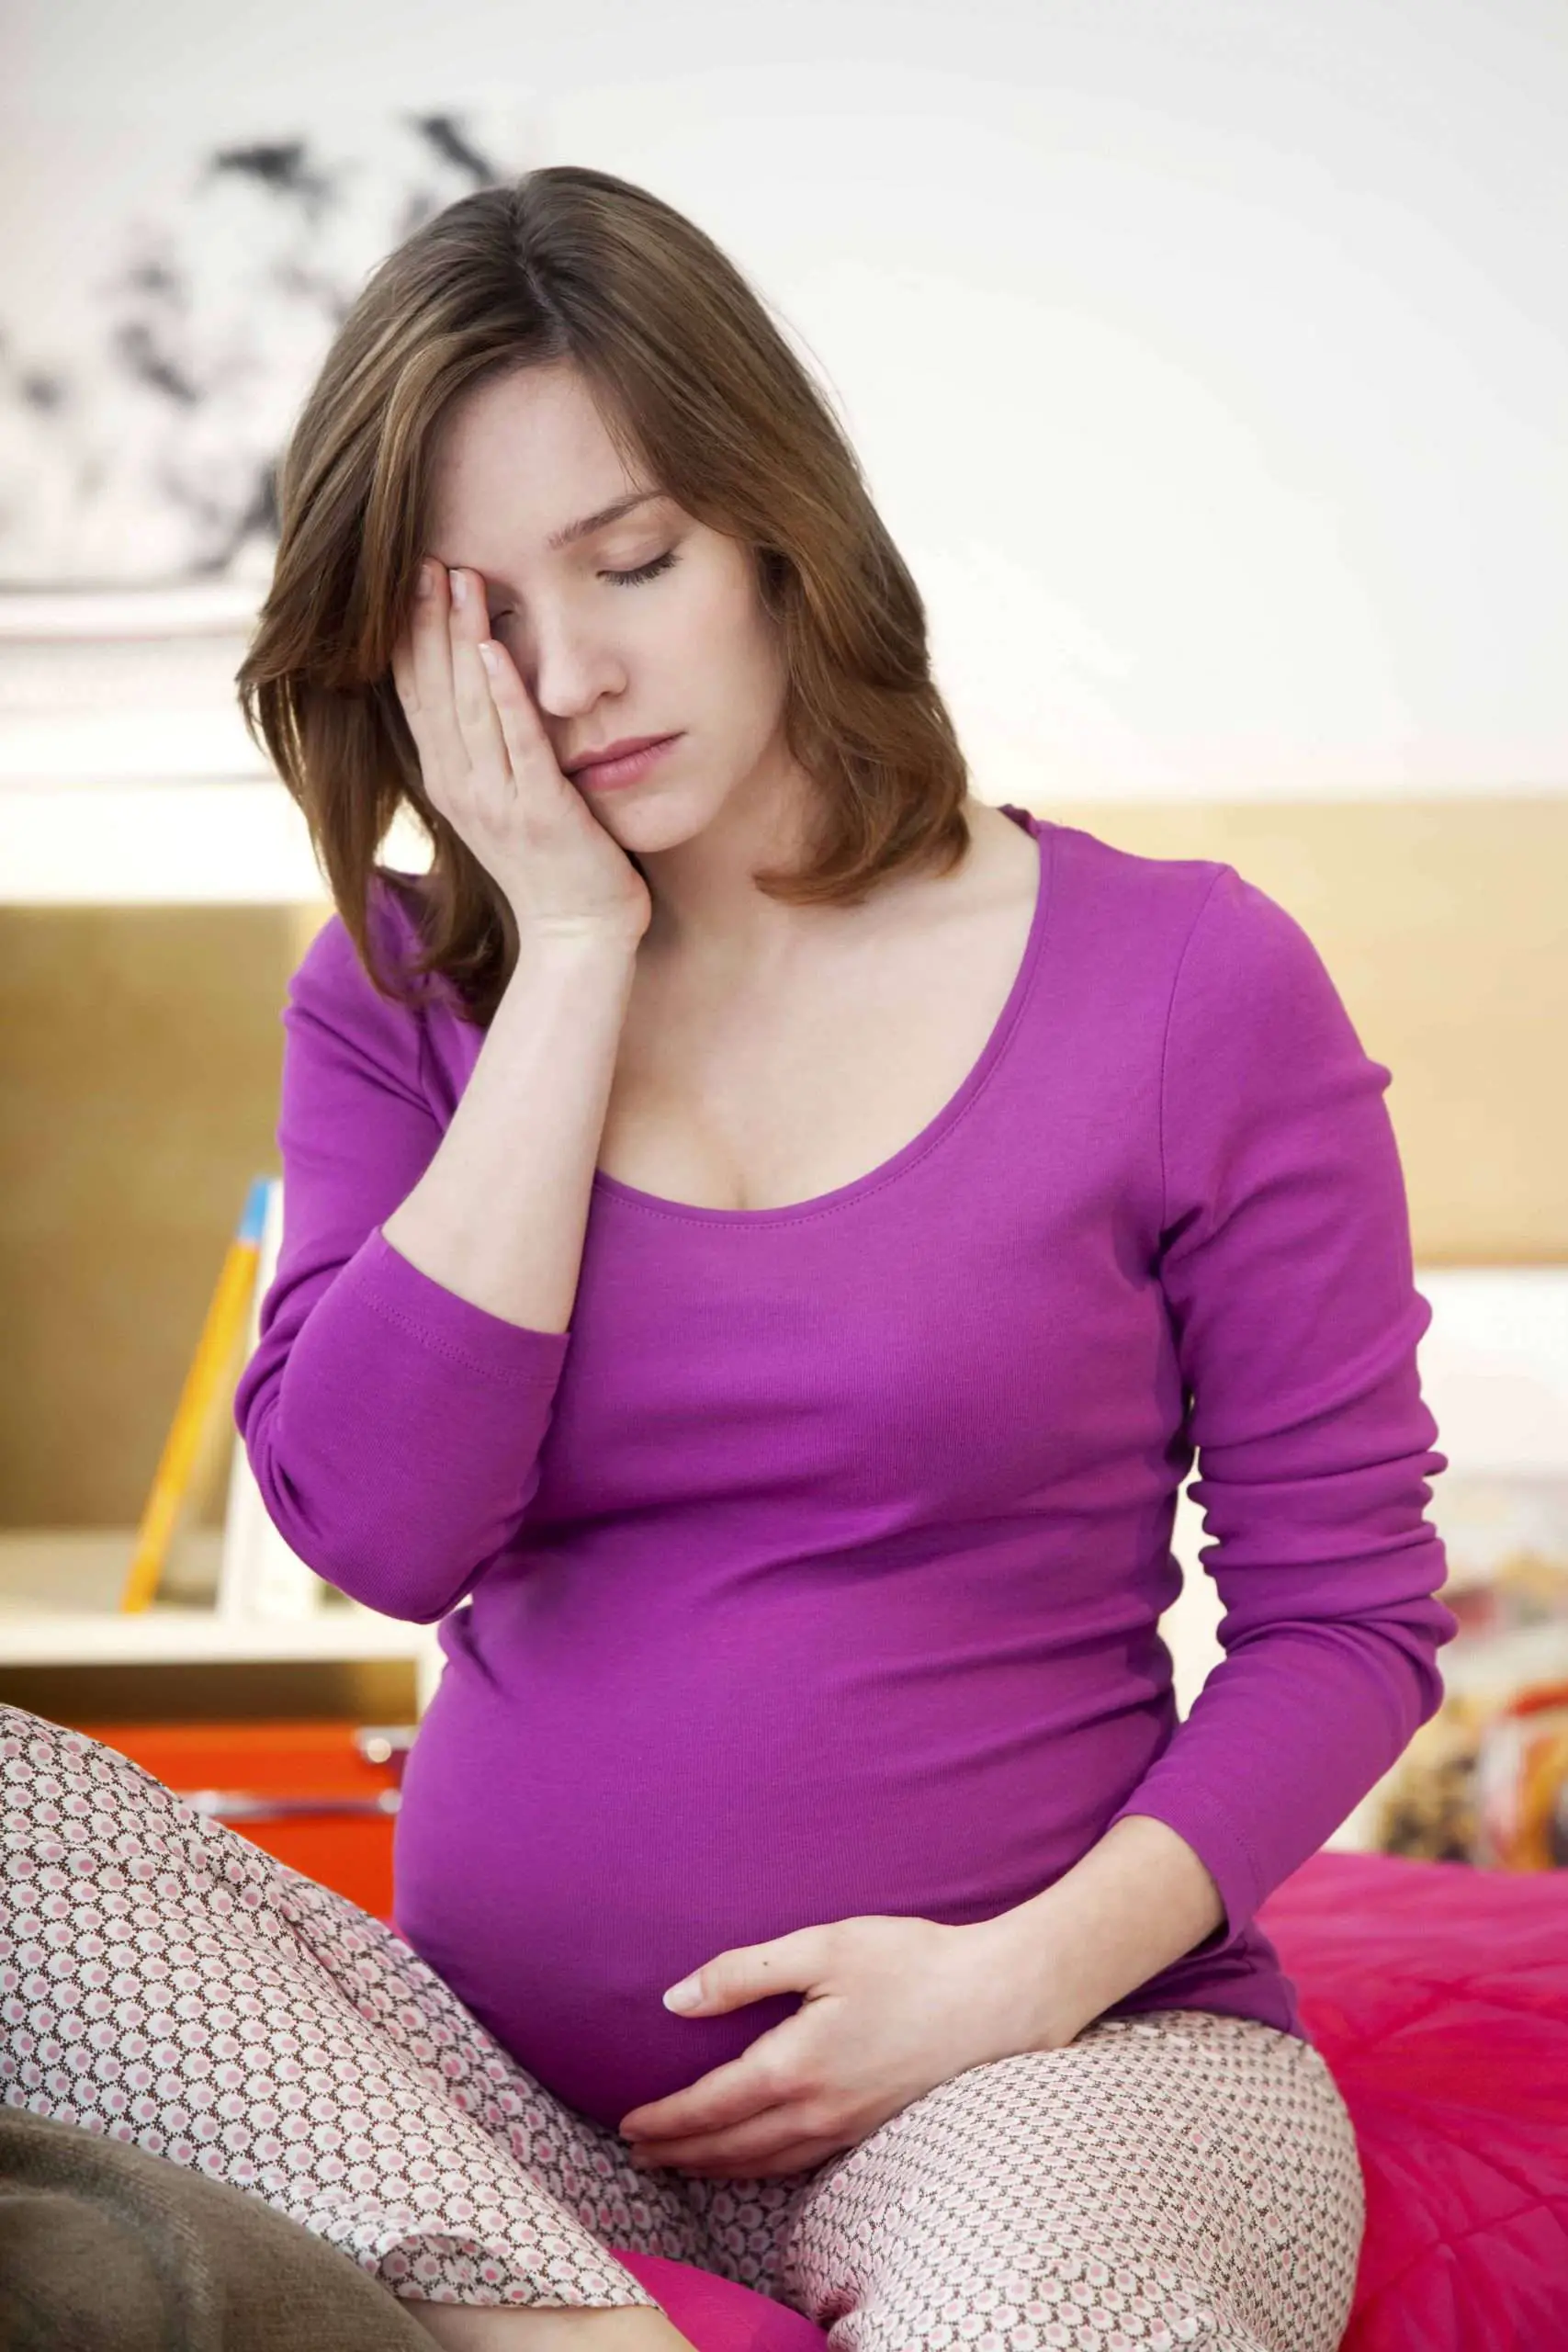 10 Genius Tips To Fight Fatigue During Pregnancy